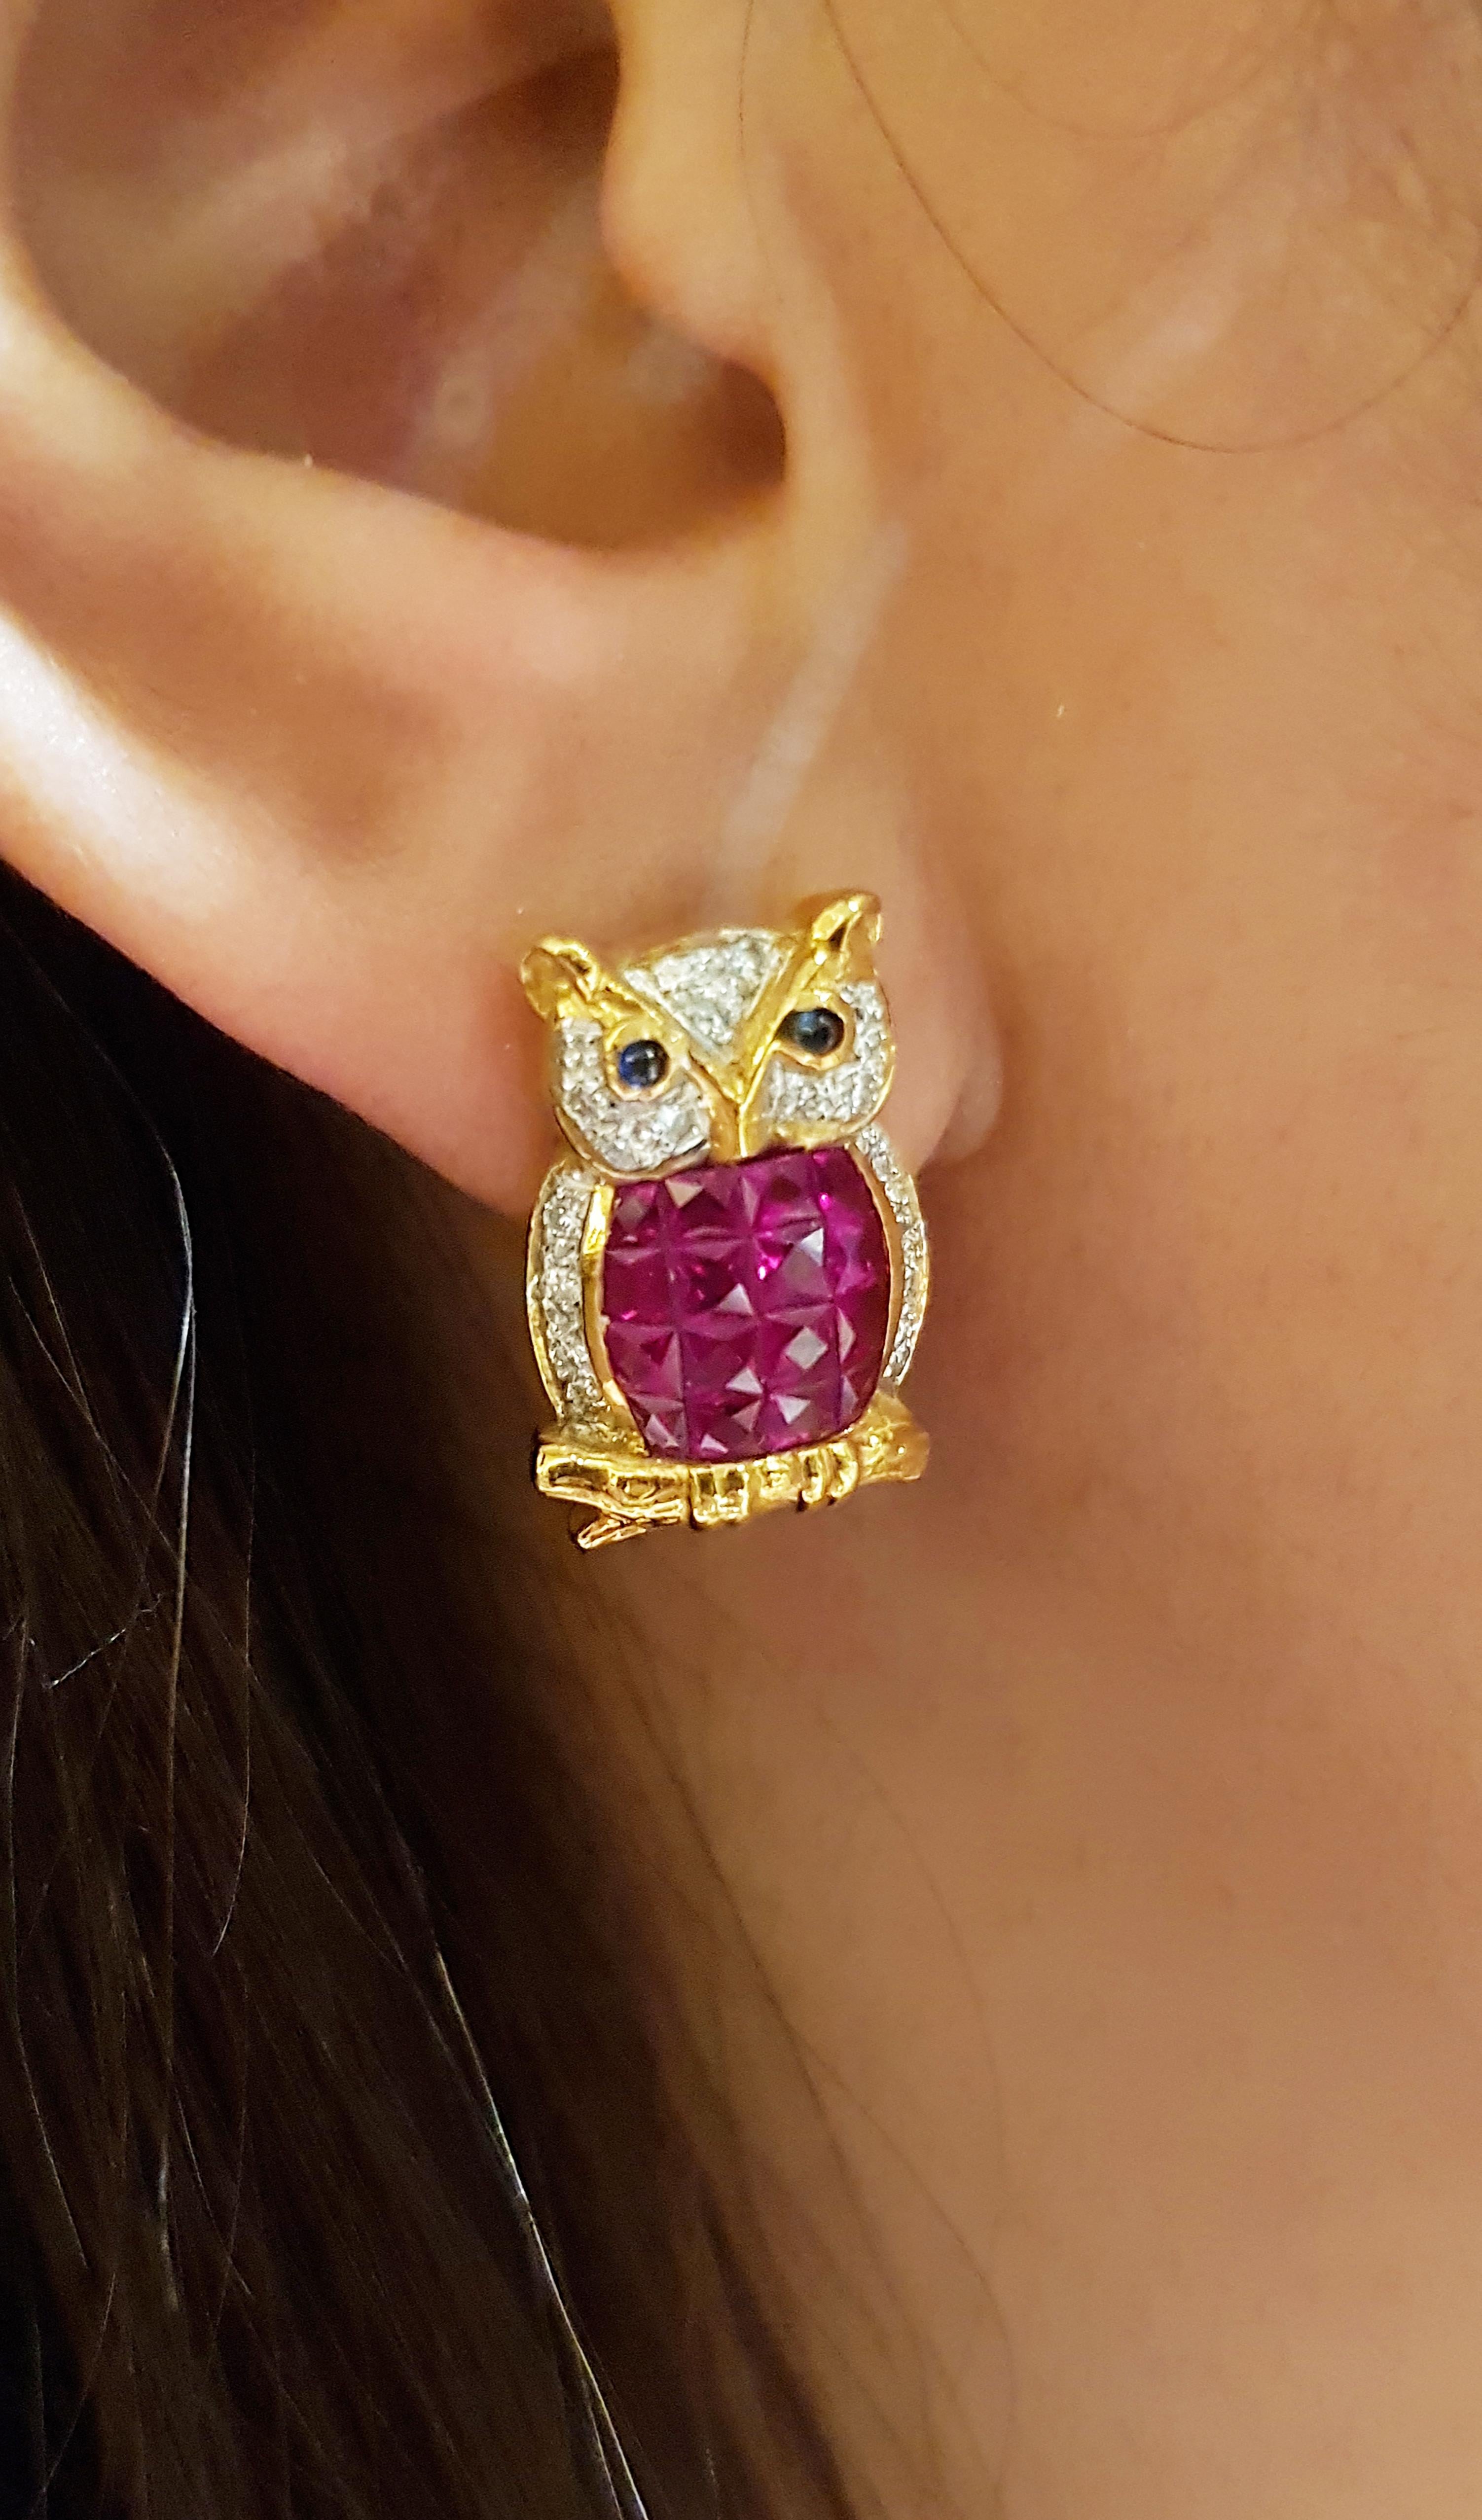 Ruby 4.23 carats with Diamond 0.26 carat and Cabochon Blue Sapphire 0.21 carat Earrings set in 18 Karat Gold Settings

Width:  1.1 cm 
Length: 1.8 cm
Total Weight: 9.05 grams

